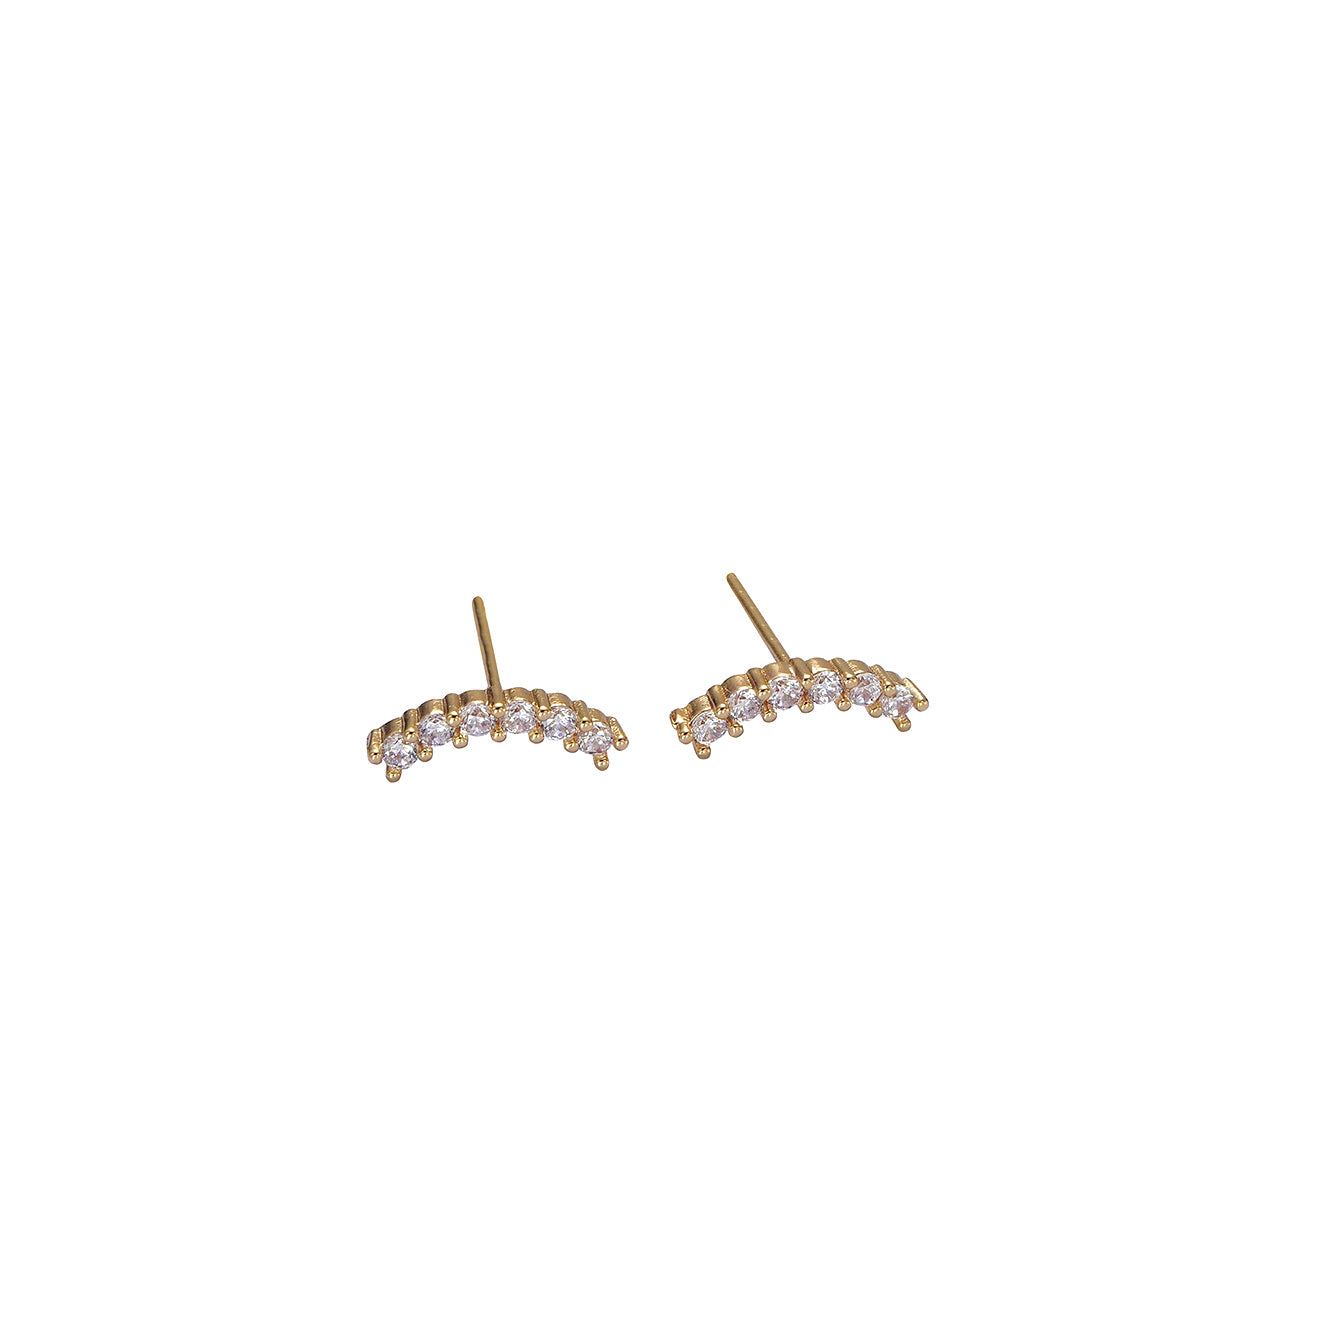 Gold and white half-moon earrings